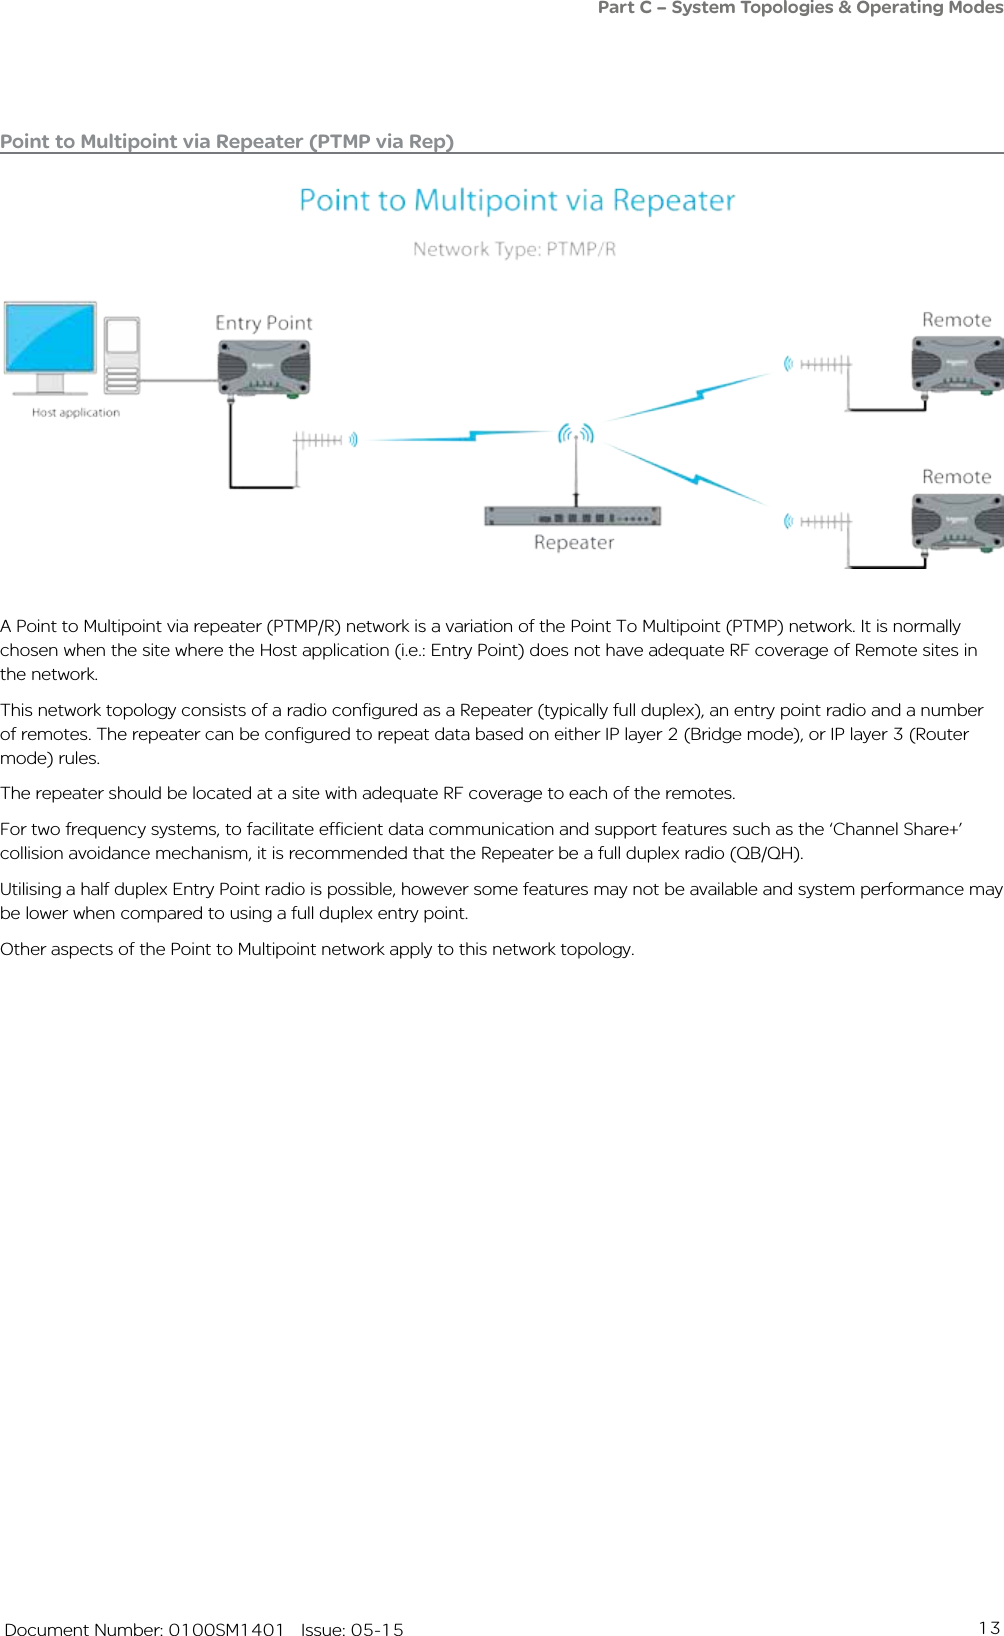 13   Document Number: 0100SM1401   Issue: 05-15Point to Multipoint via Repeater (PTMP via Rep)A Point to Multipoint via repeater (PTMP/R) network is a variation of the Point To Multipoint (PTMP) network. It is normally chosen when the site where the Host application (i.e.: Entry Point) does not have adequate RF coverage of Remote sites in the network. This network topology consists of a radio configured as a Repeater (typically full duplex), an entry point radio and a number of remotes. The repeater can be configured to repeat data based on either IP layer 2 (Bridge mode), or IP layer 3 (Router mode) rules. The repeater should be located at a site with adequate RF coverage to each of the remotes. For two frequency systems, to facilitate efficient data communication and support features such as the ‘Channel Share+’ collision avoidance mechanism, it is recommended that the Repeater be a full duplex radio (QB/QH). Utilising a half duplex Entry Point radio is possible, however some features may not be available and system performance may be lower when compared to using a full duplex entry point.Other aspects of the Point to Multipoint network apply to this network topology.Part C – System Topologies &amp; Operating Modes